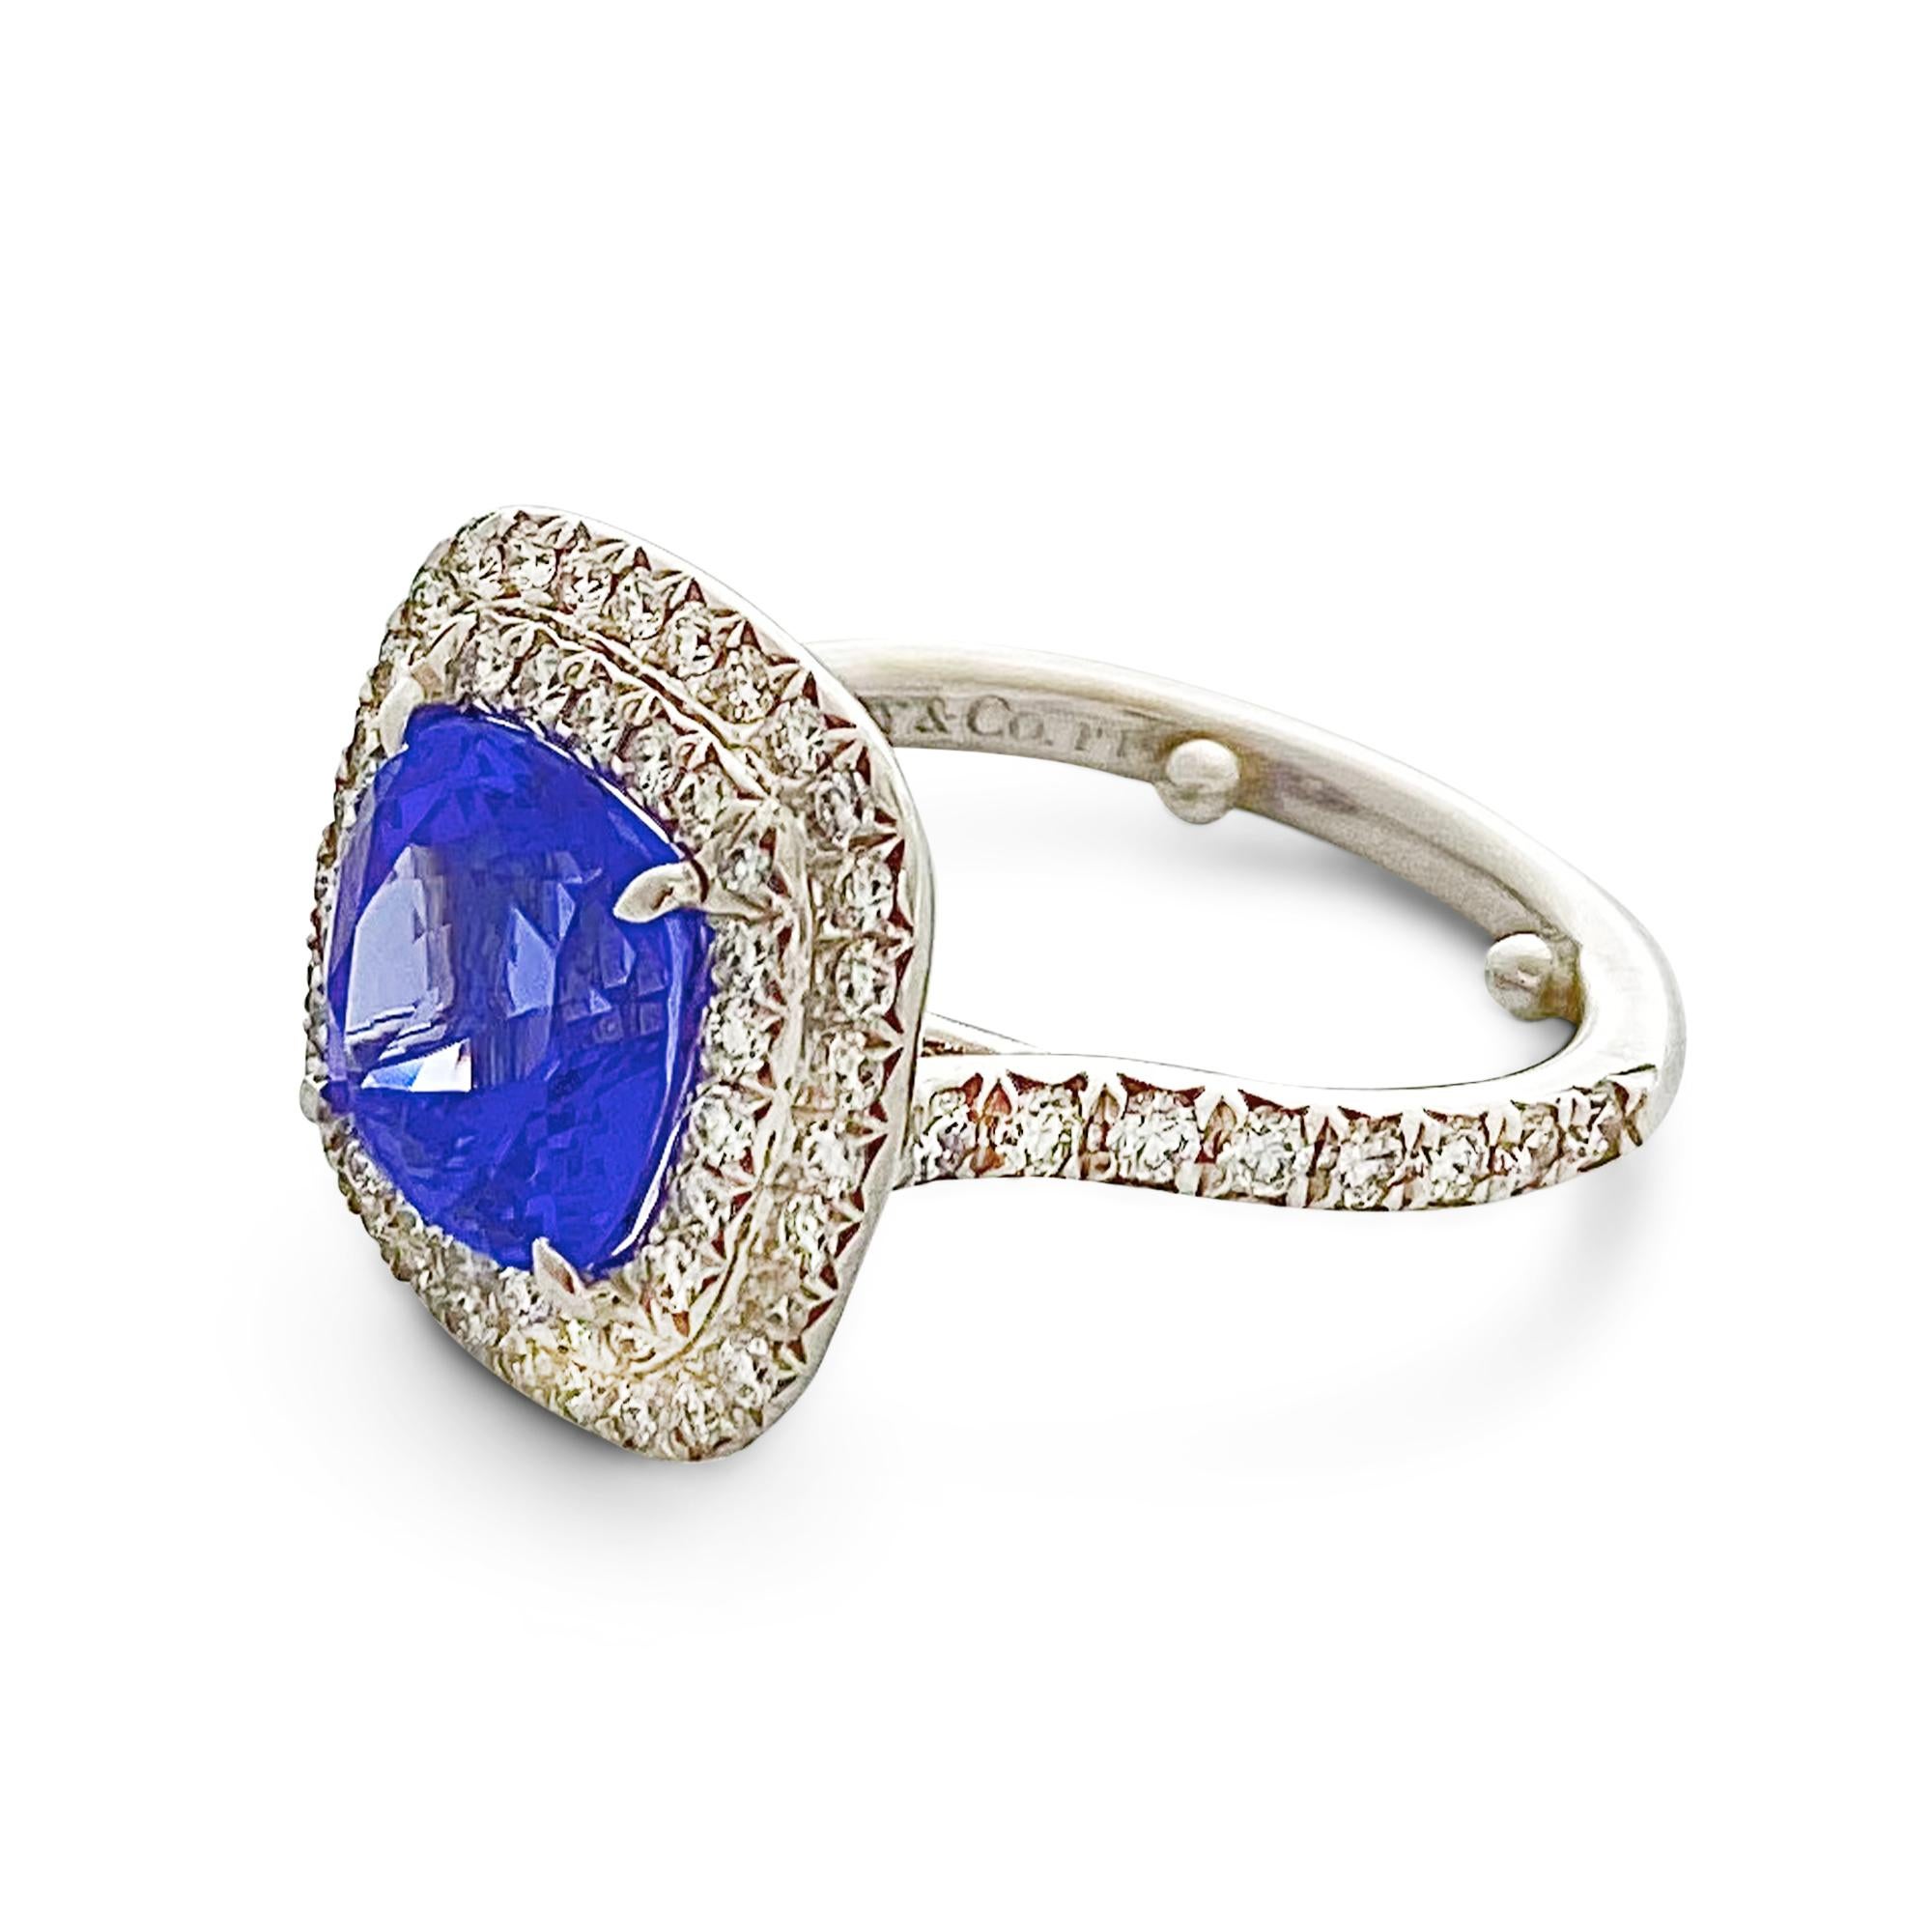 Authentic Tiffany & Co. Soleste ring crafted in platinum.  Centering on a GIA-certified cushion cut tanzanite of 2.45 carats, surrounded by a double halo of glittering round brilliant cut diamonds weighing an estimated .50 carats total.  Size 5 with